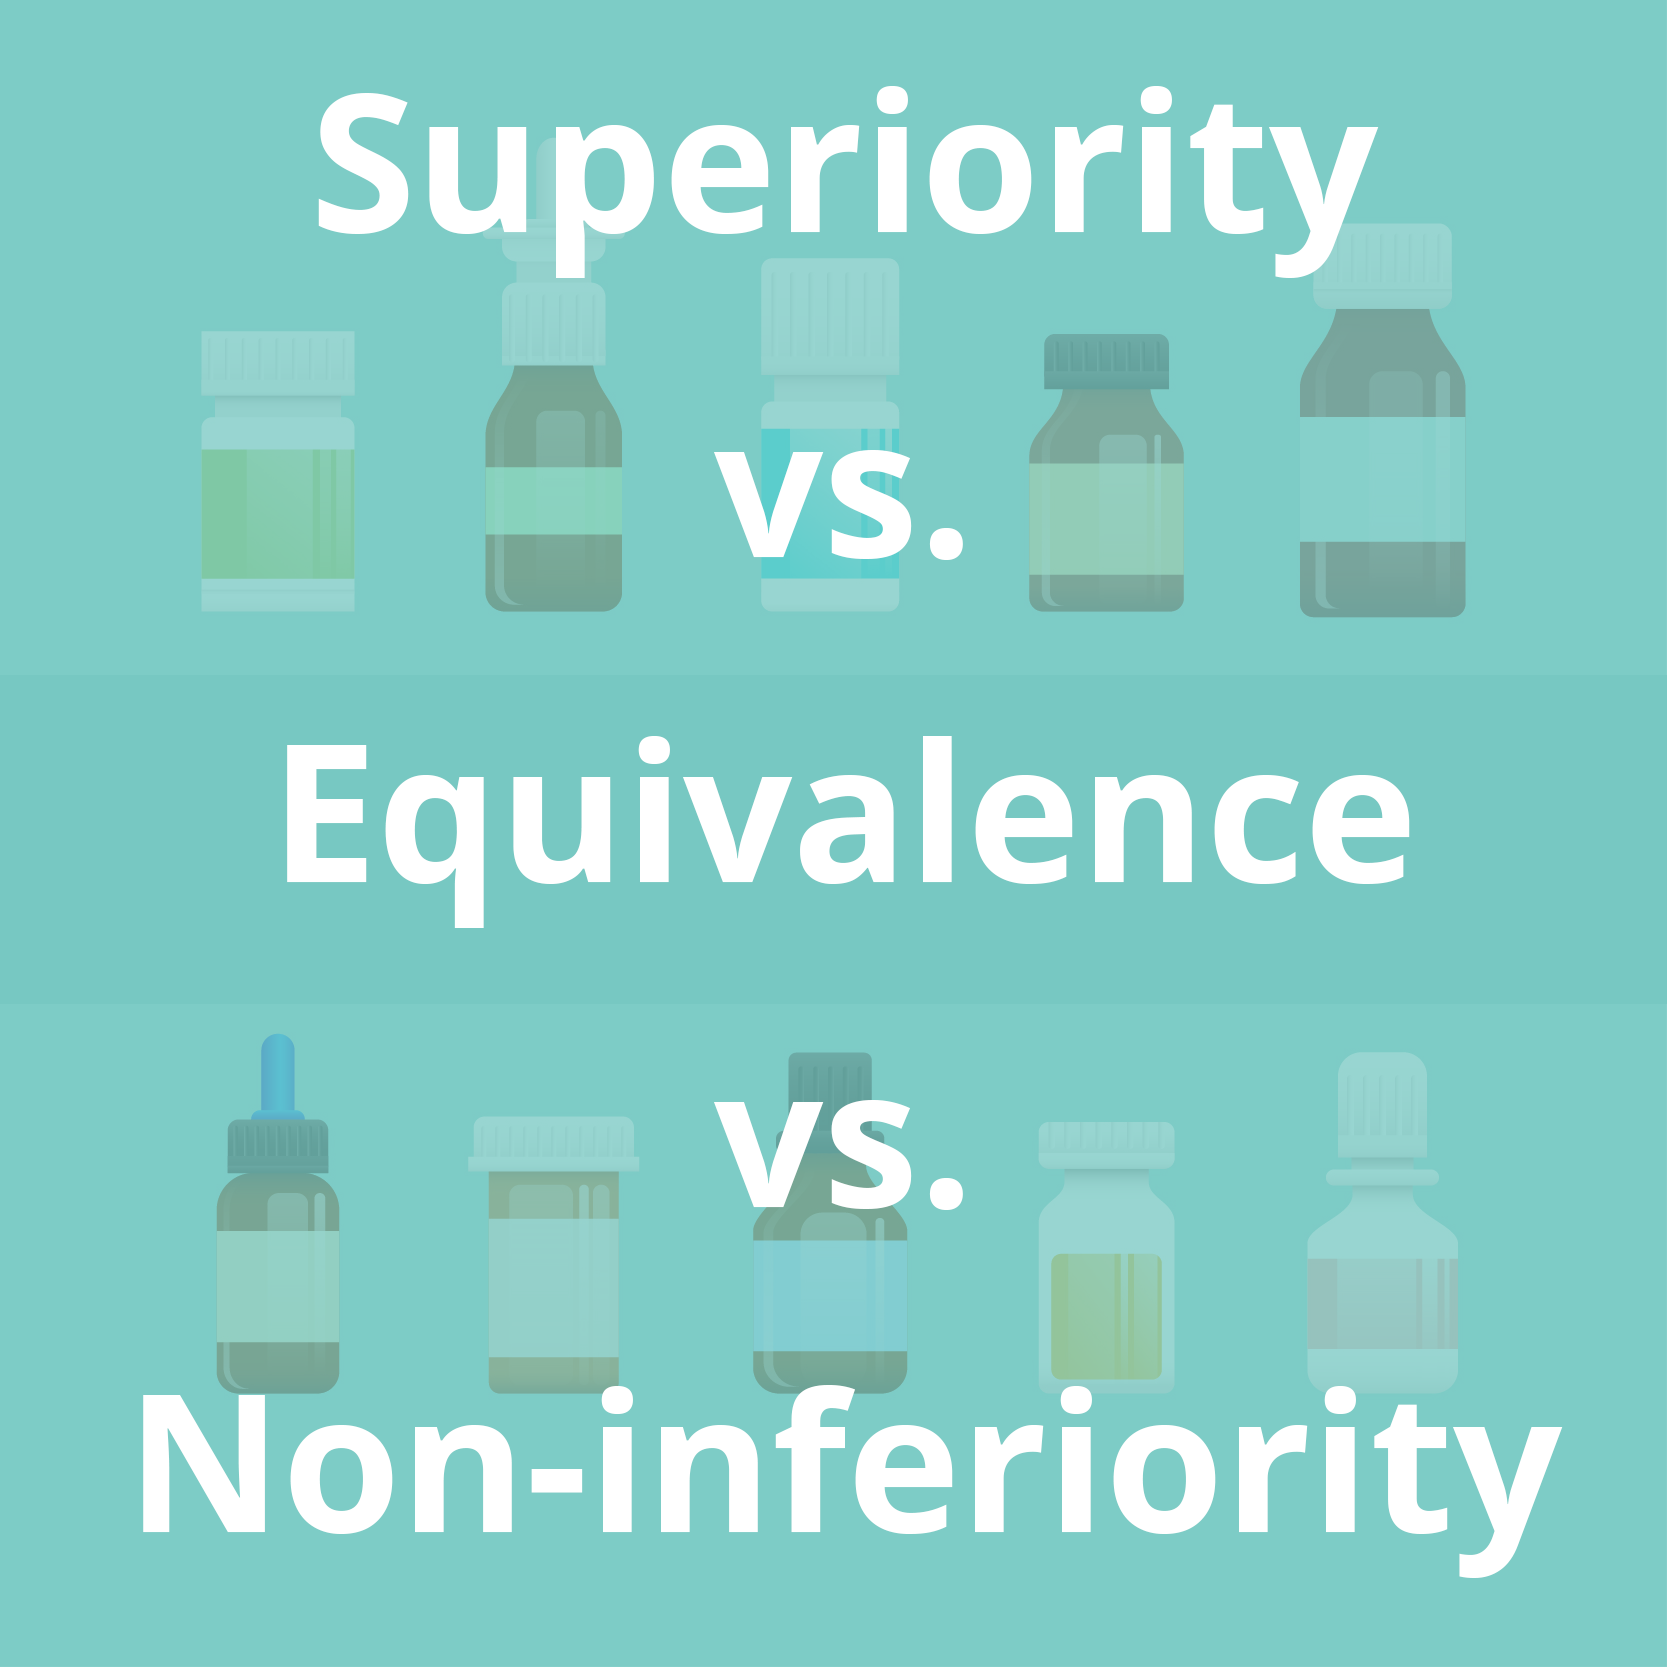 What is the difference between Superiority vs. Equivalence vs. Non